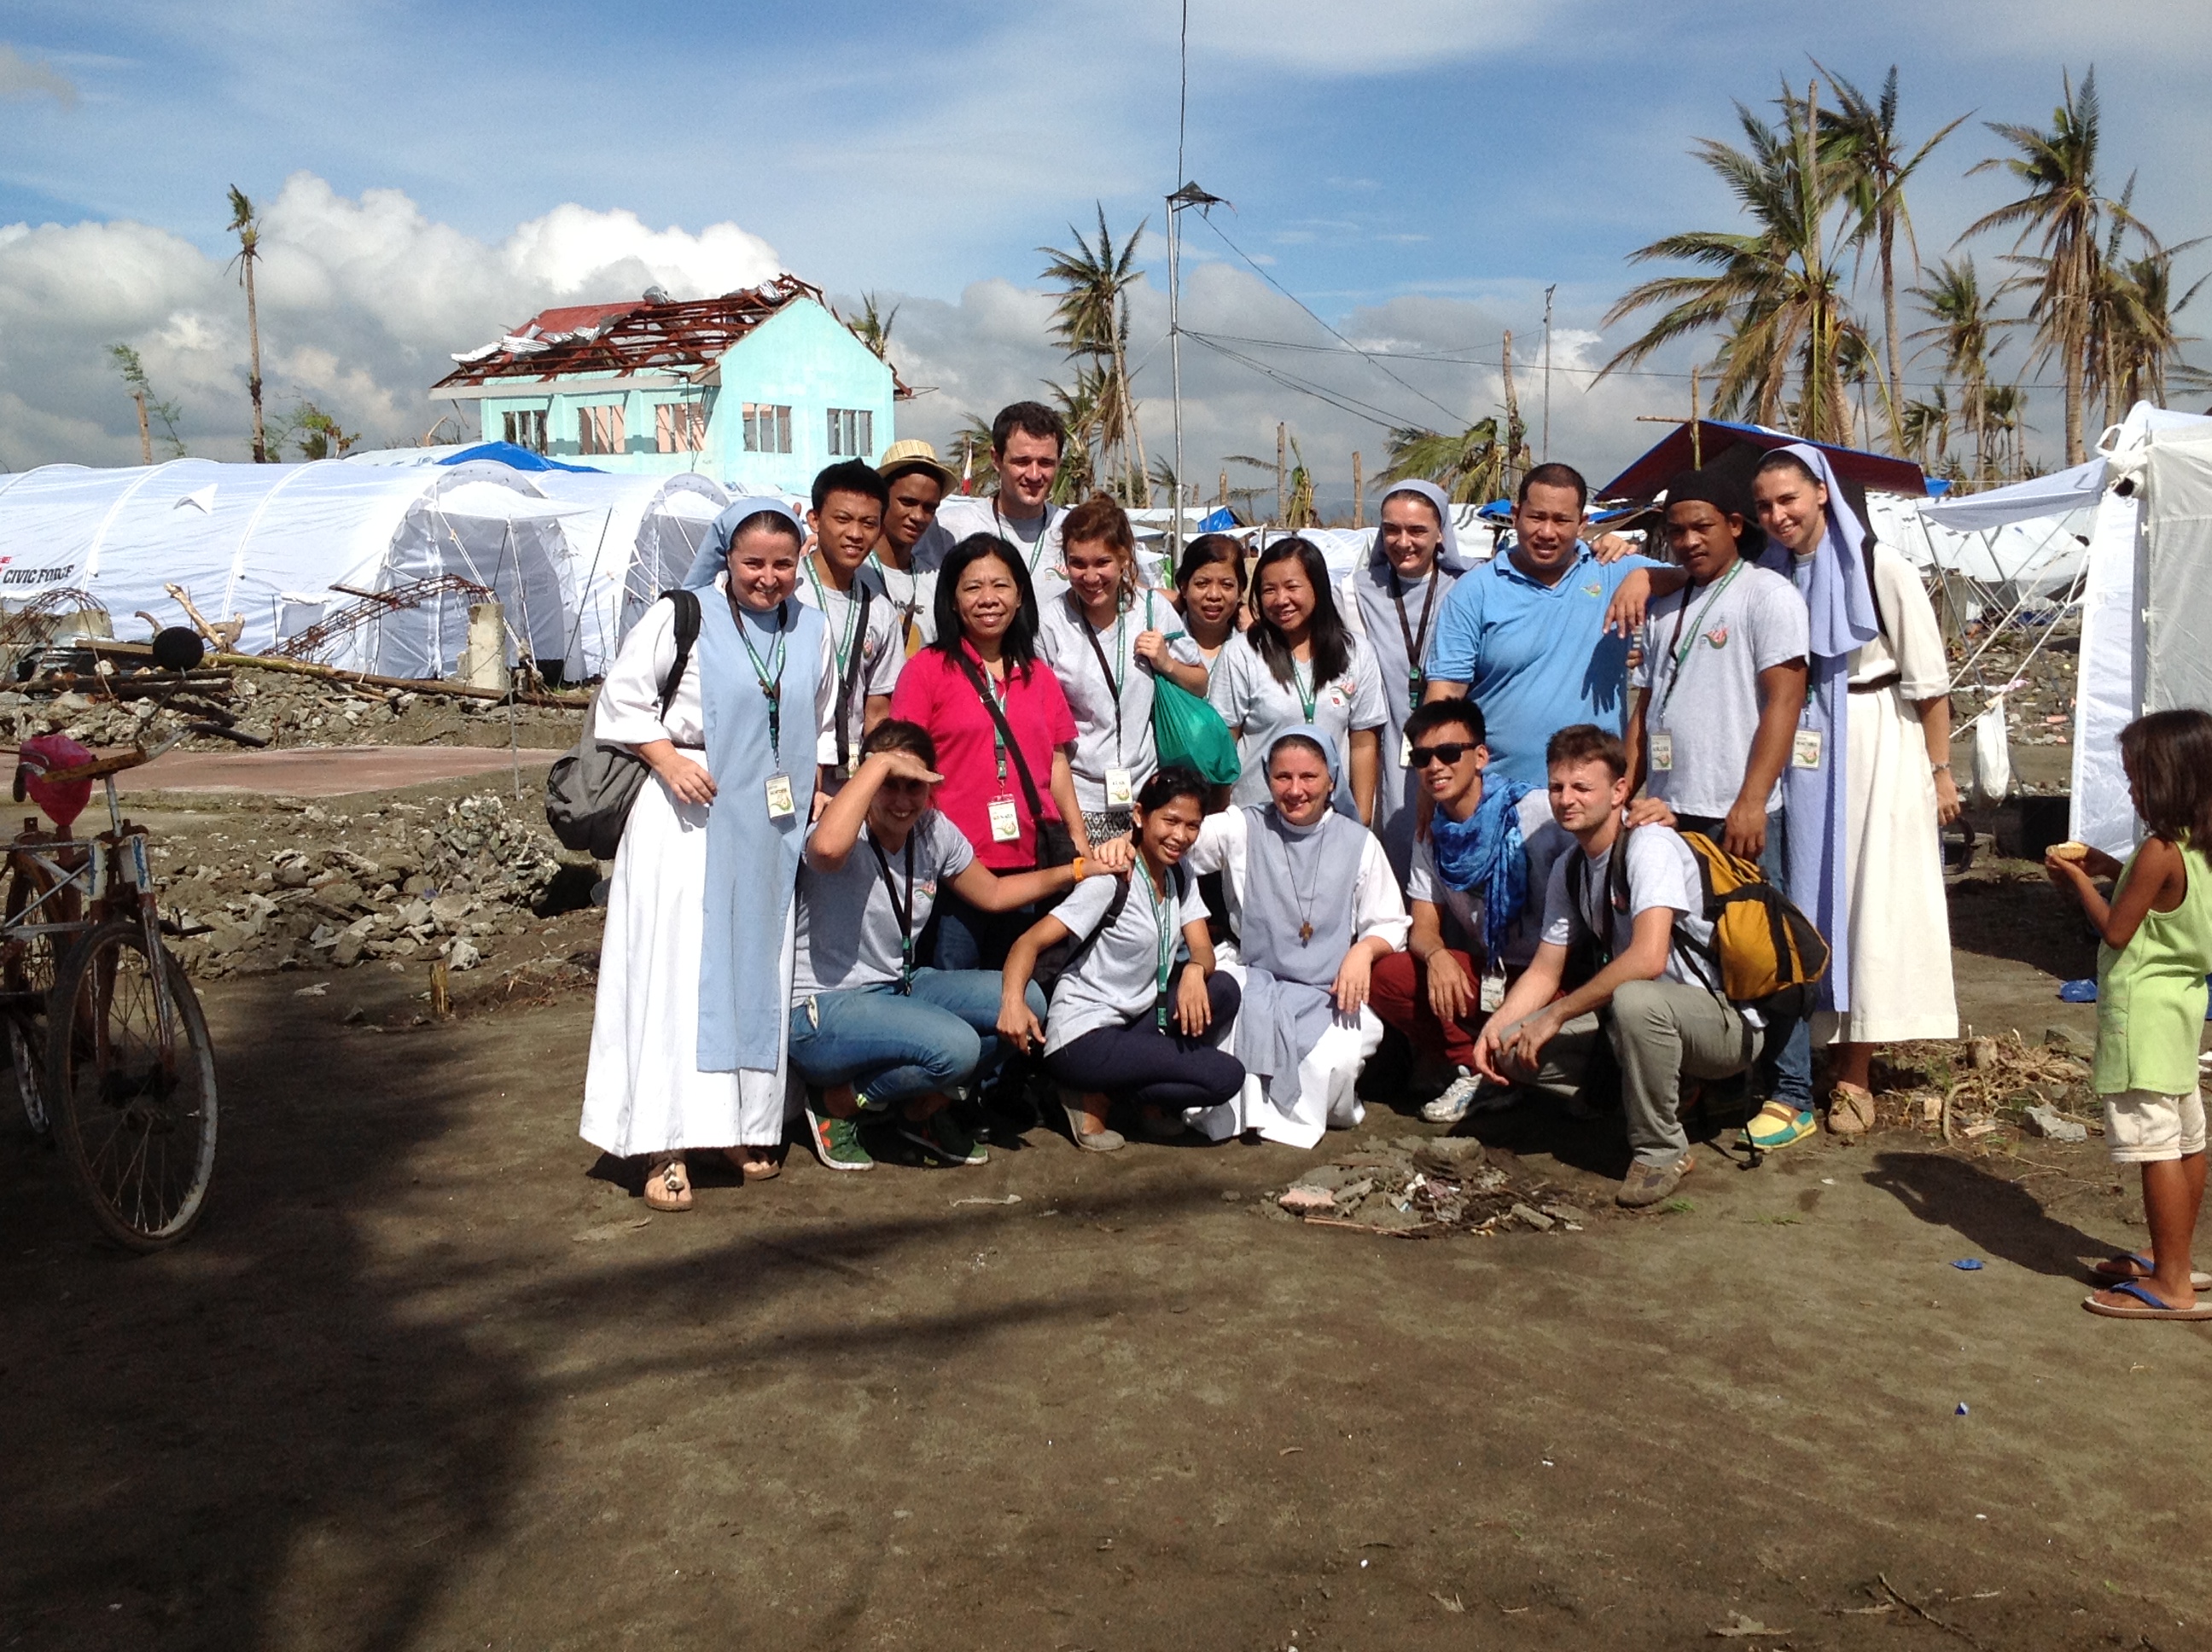 2013 – The mission in Tacloban